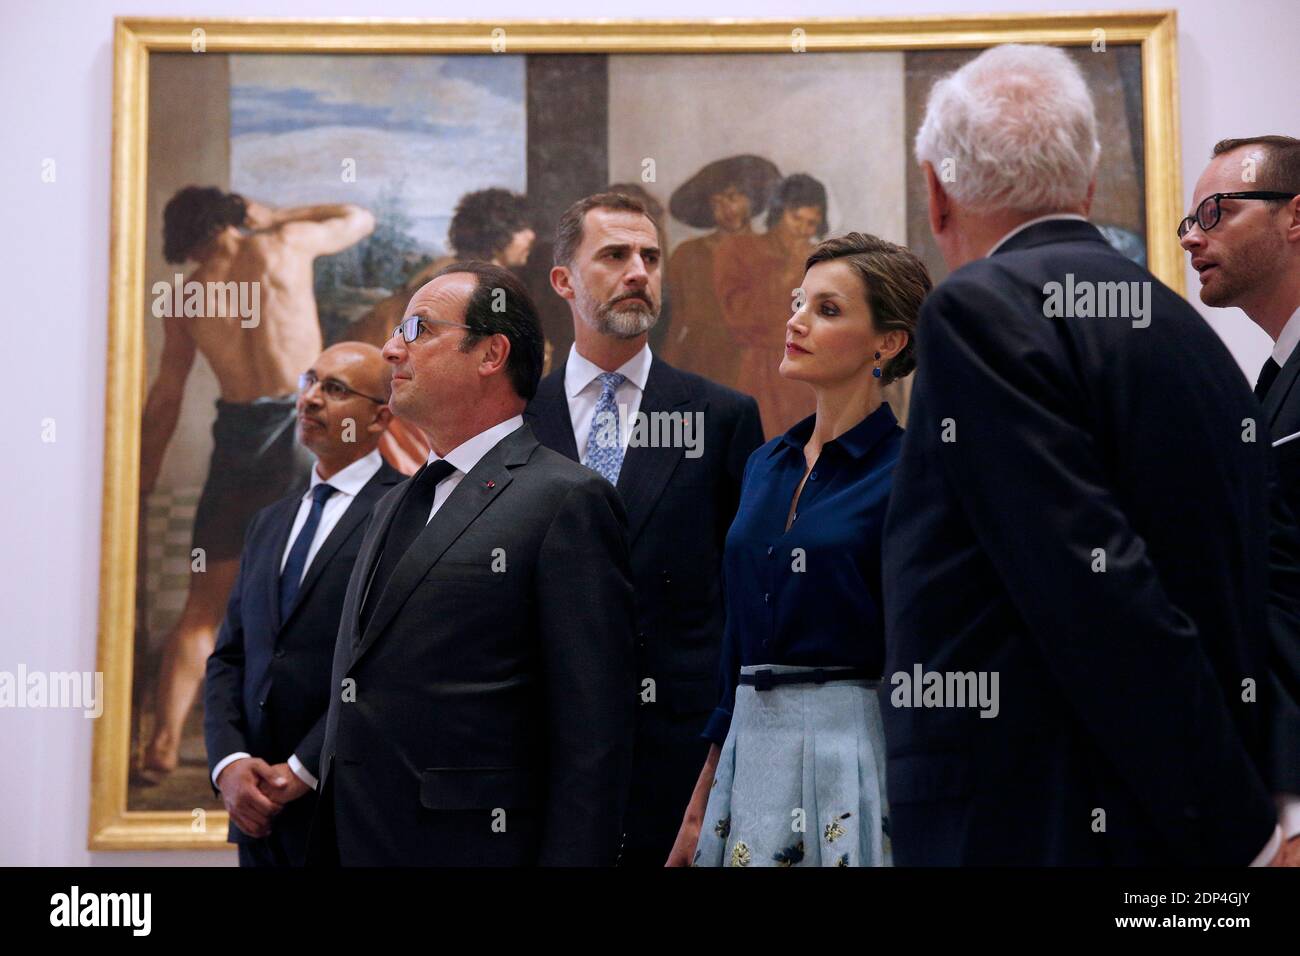 (L-R) French Junior Minister for European Affairs Harlem Desir, French President Francois Hollande, King Felipe VI and Queen Letizia of Spain pass by the painting 'La Tunique de Joseph' (Joseph's bloody coat brought to Jacob) as they tour the exhibition 'Velasquez - The golden age of Spanish art' at Grand Palais in Paris, France on June 2, 2015. Photo by Yoan Valat/Pool/ABACAPRESS.COM Stock Photo